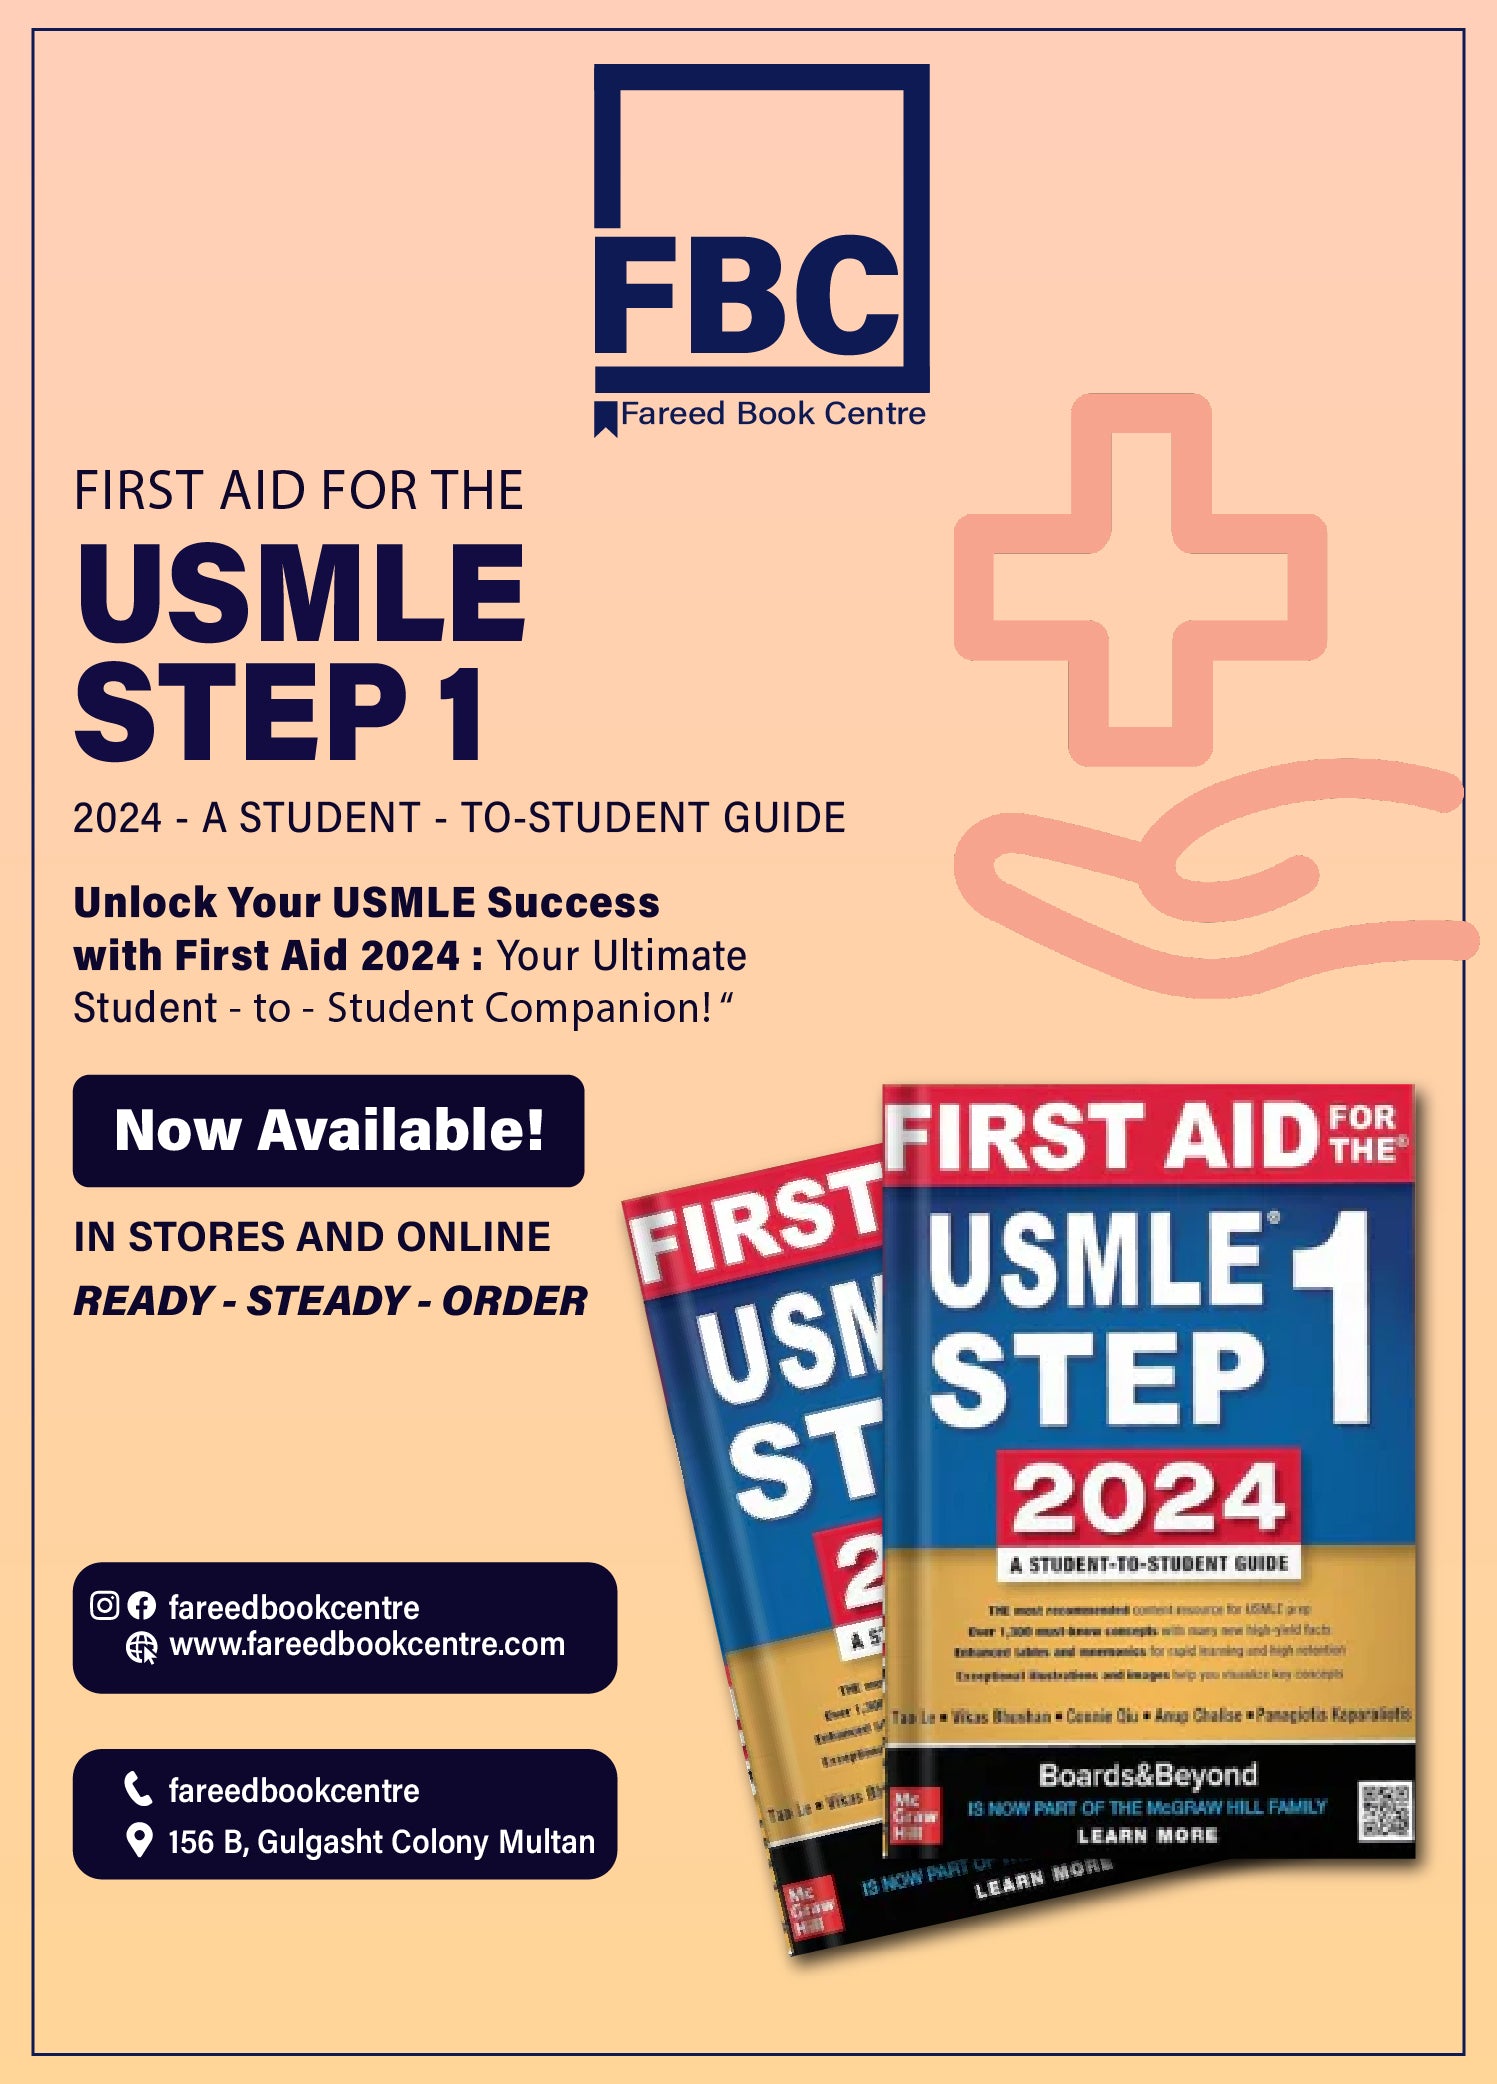 First Aid For The USMLE Step 1 2024 Edition With Free Delivery all over Pakistan